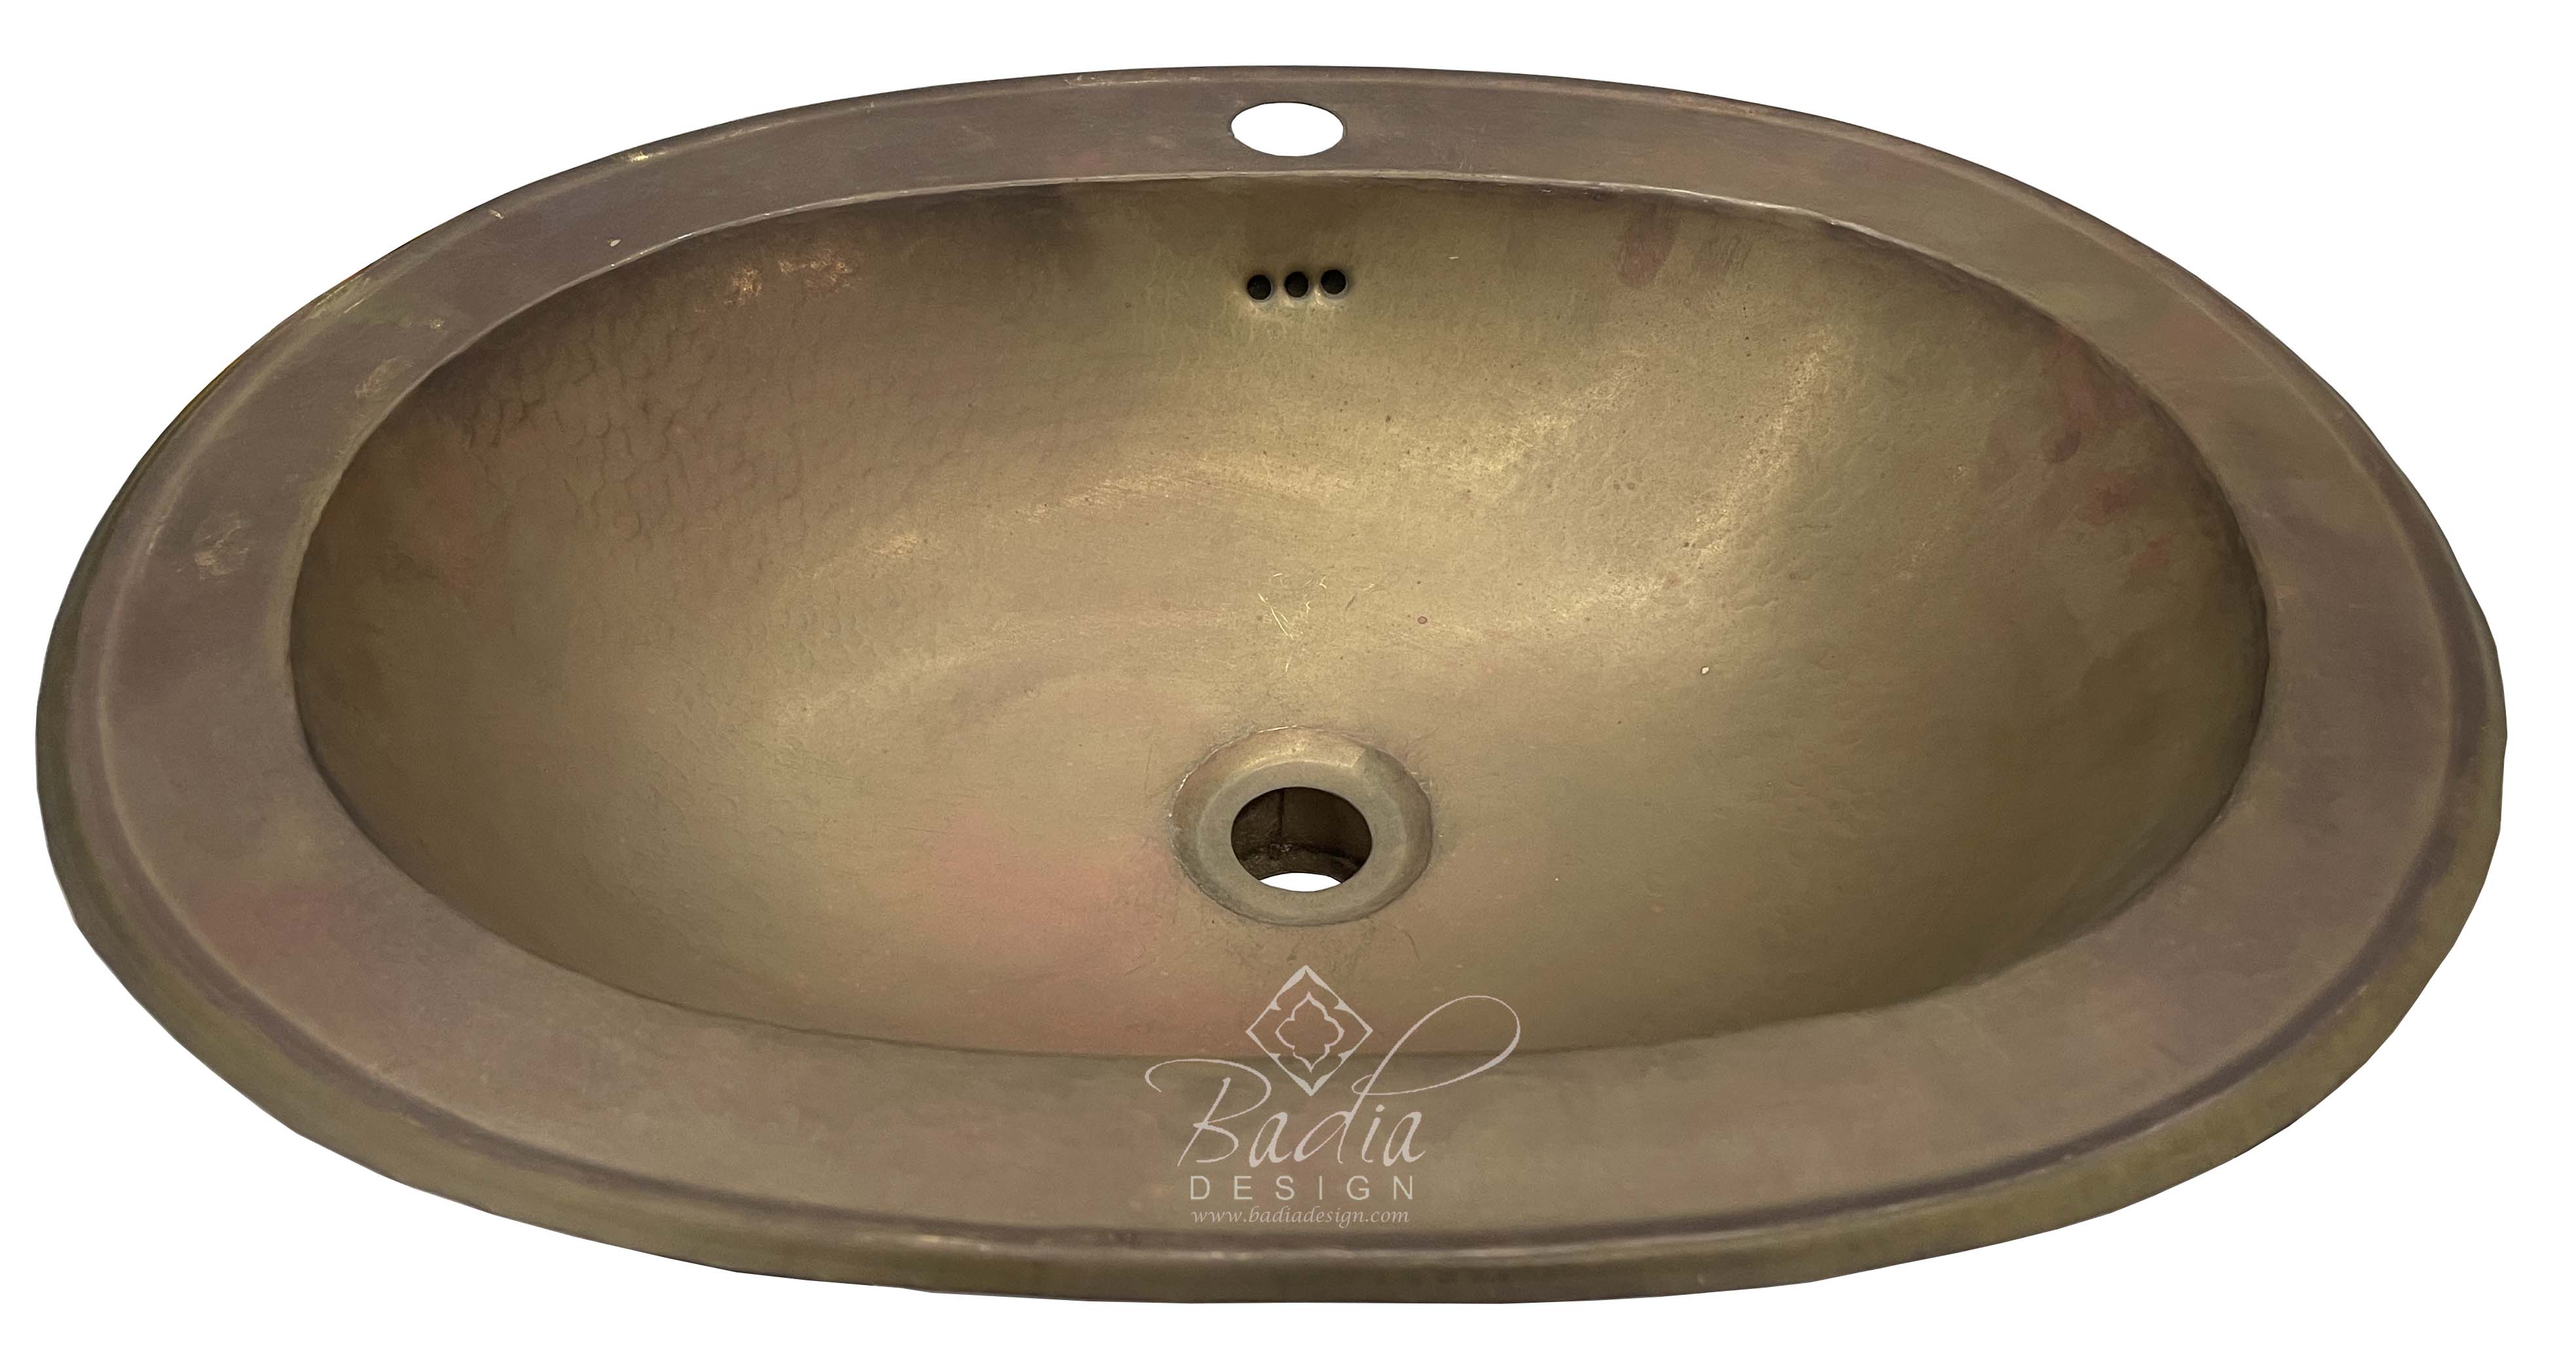 moroccan-oval-shaped-bronze-color-sink-ms034-1.jpg